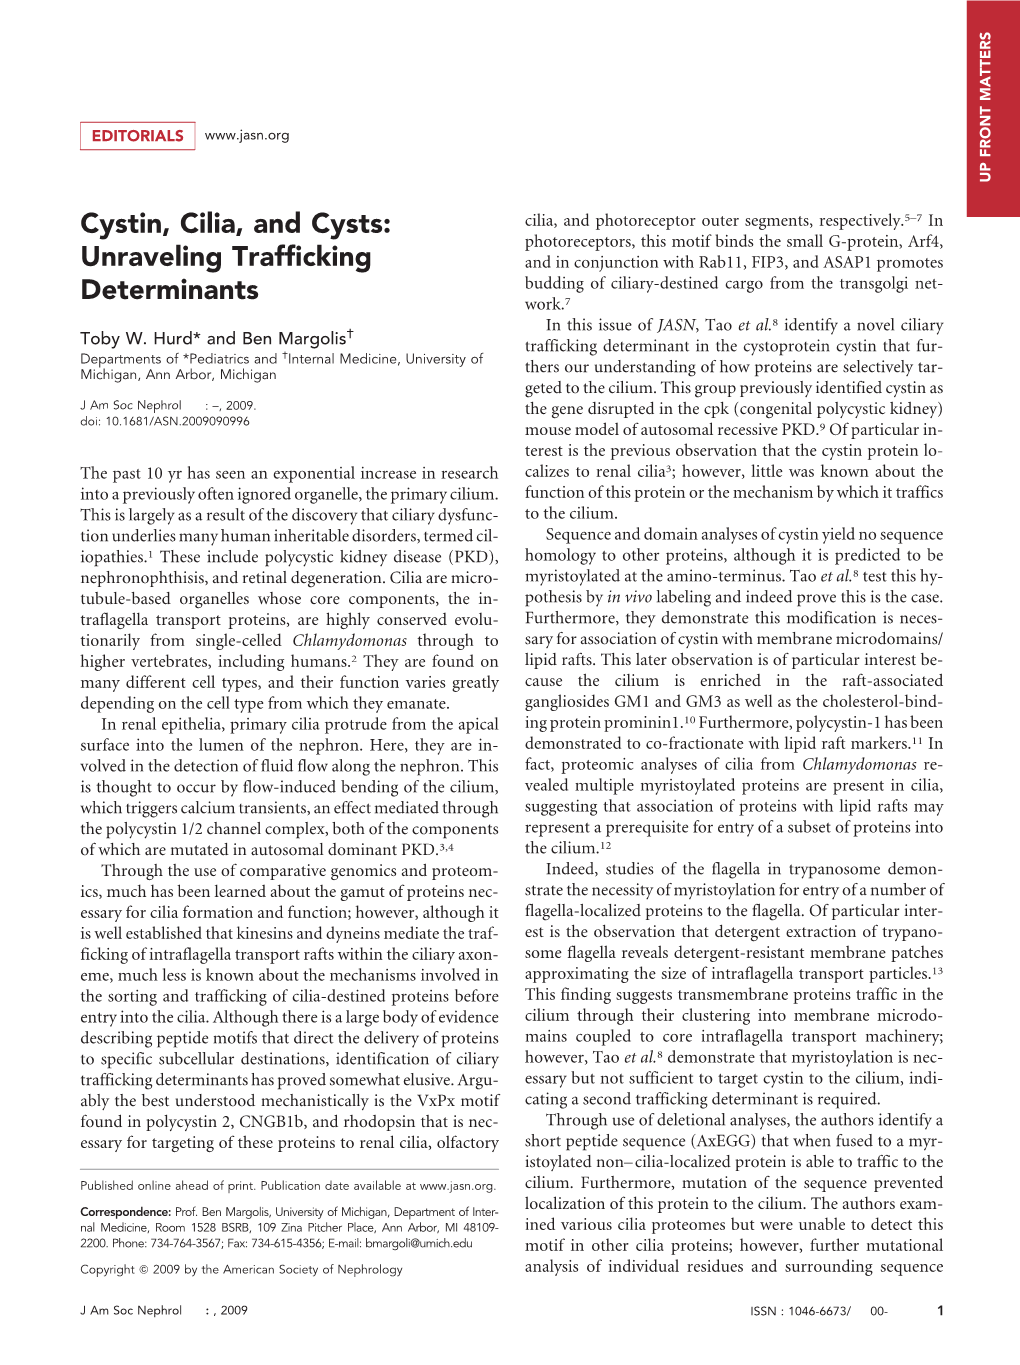 Cystin, Cilia, and Cysts: Unraveling Trafficking Determinants